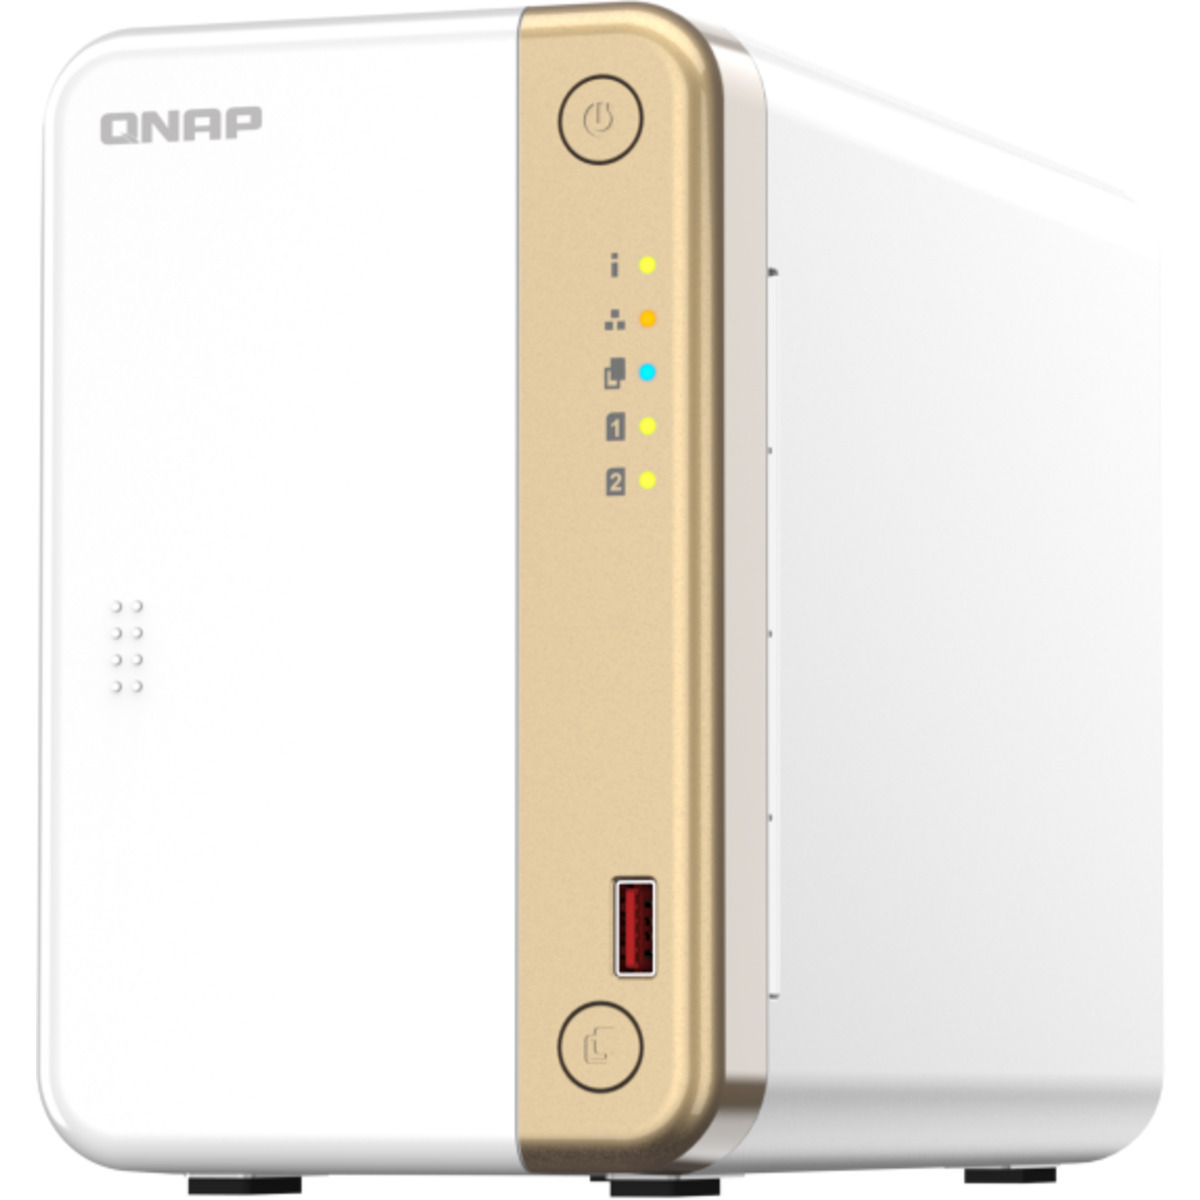 QNAP TS-262 20tb 2-Bay Desktop Personal / Basic Home / Small Office NAS - Network Attached Storage Device 1x20tb Seagate EXOS X20 ST20000NM007D 3.5 7200rpm SATA 6Gb/s HDD ENTERPRISE Class Drives Installed - Burn-In Tested TS-262